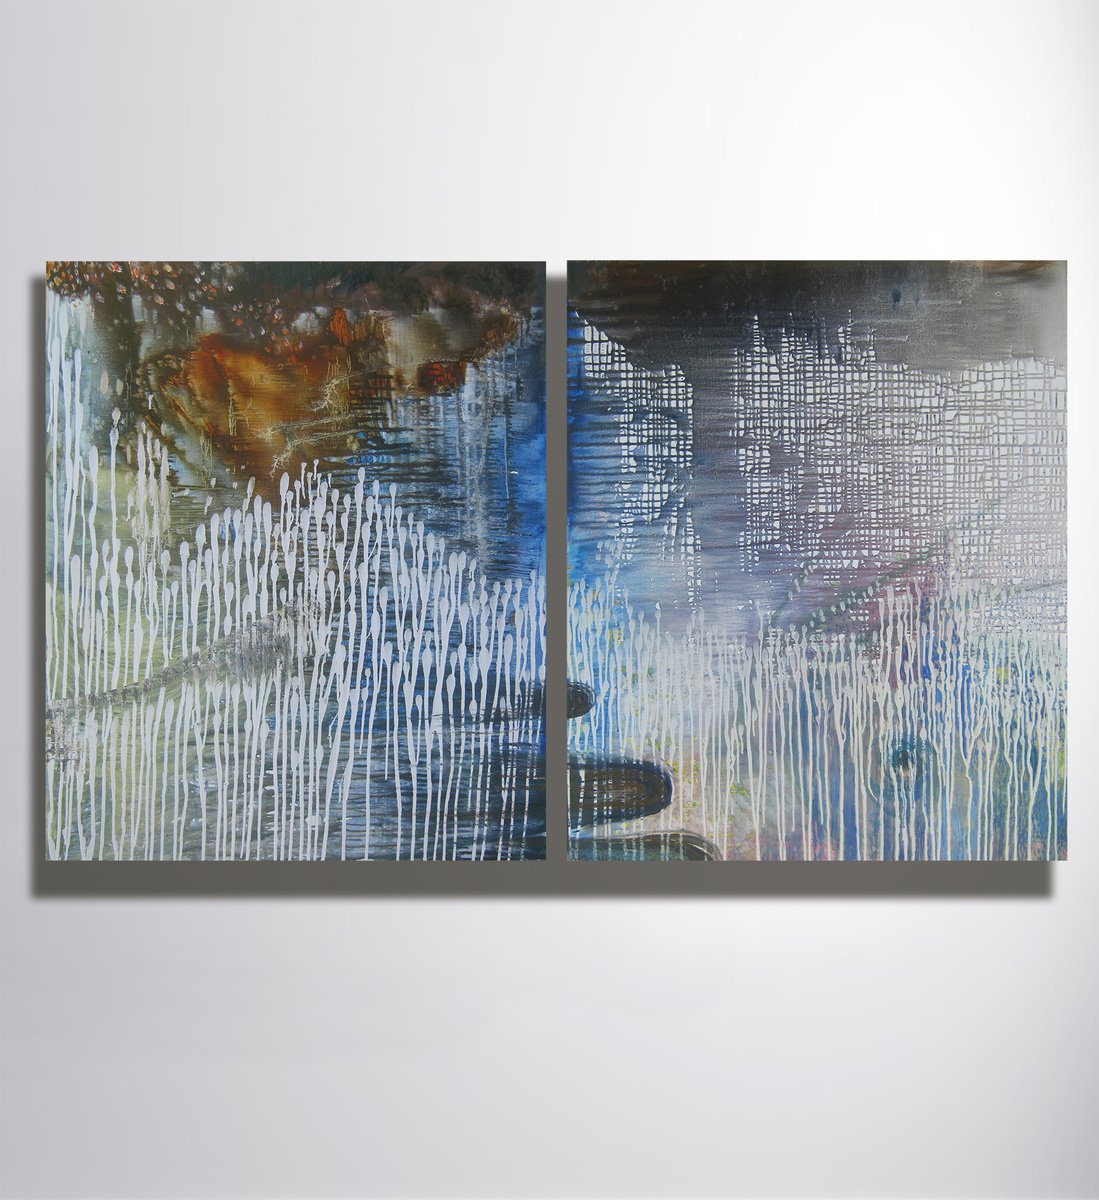 Touchpoint diptych by Marya Matienko